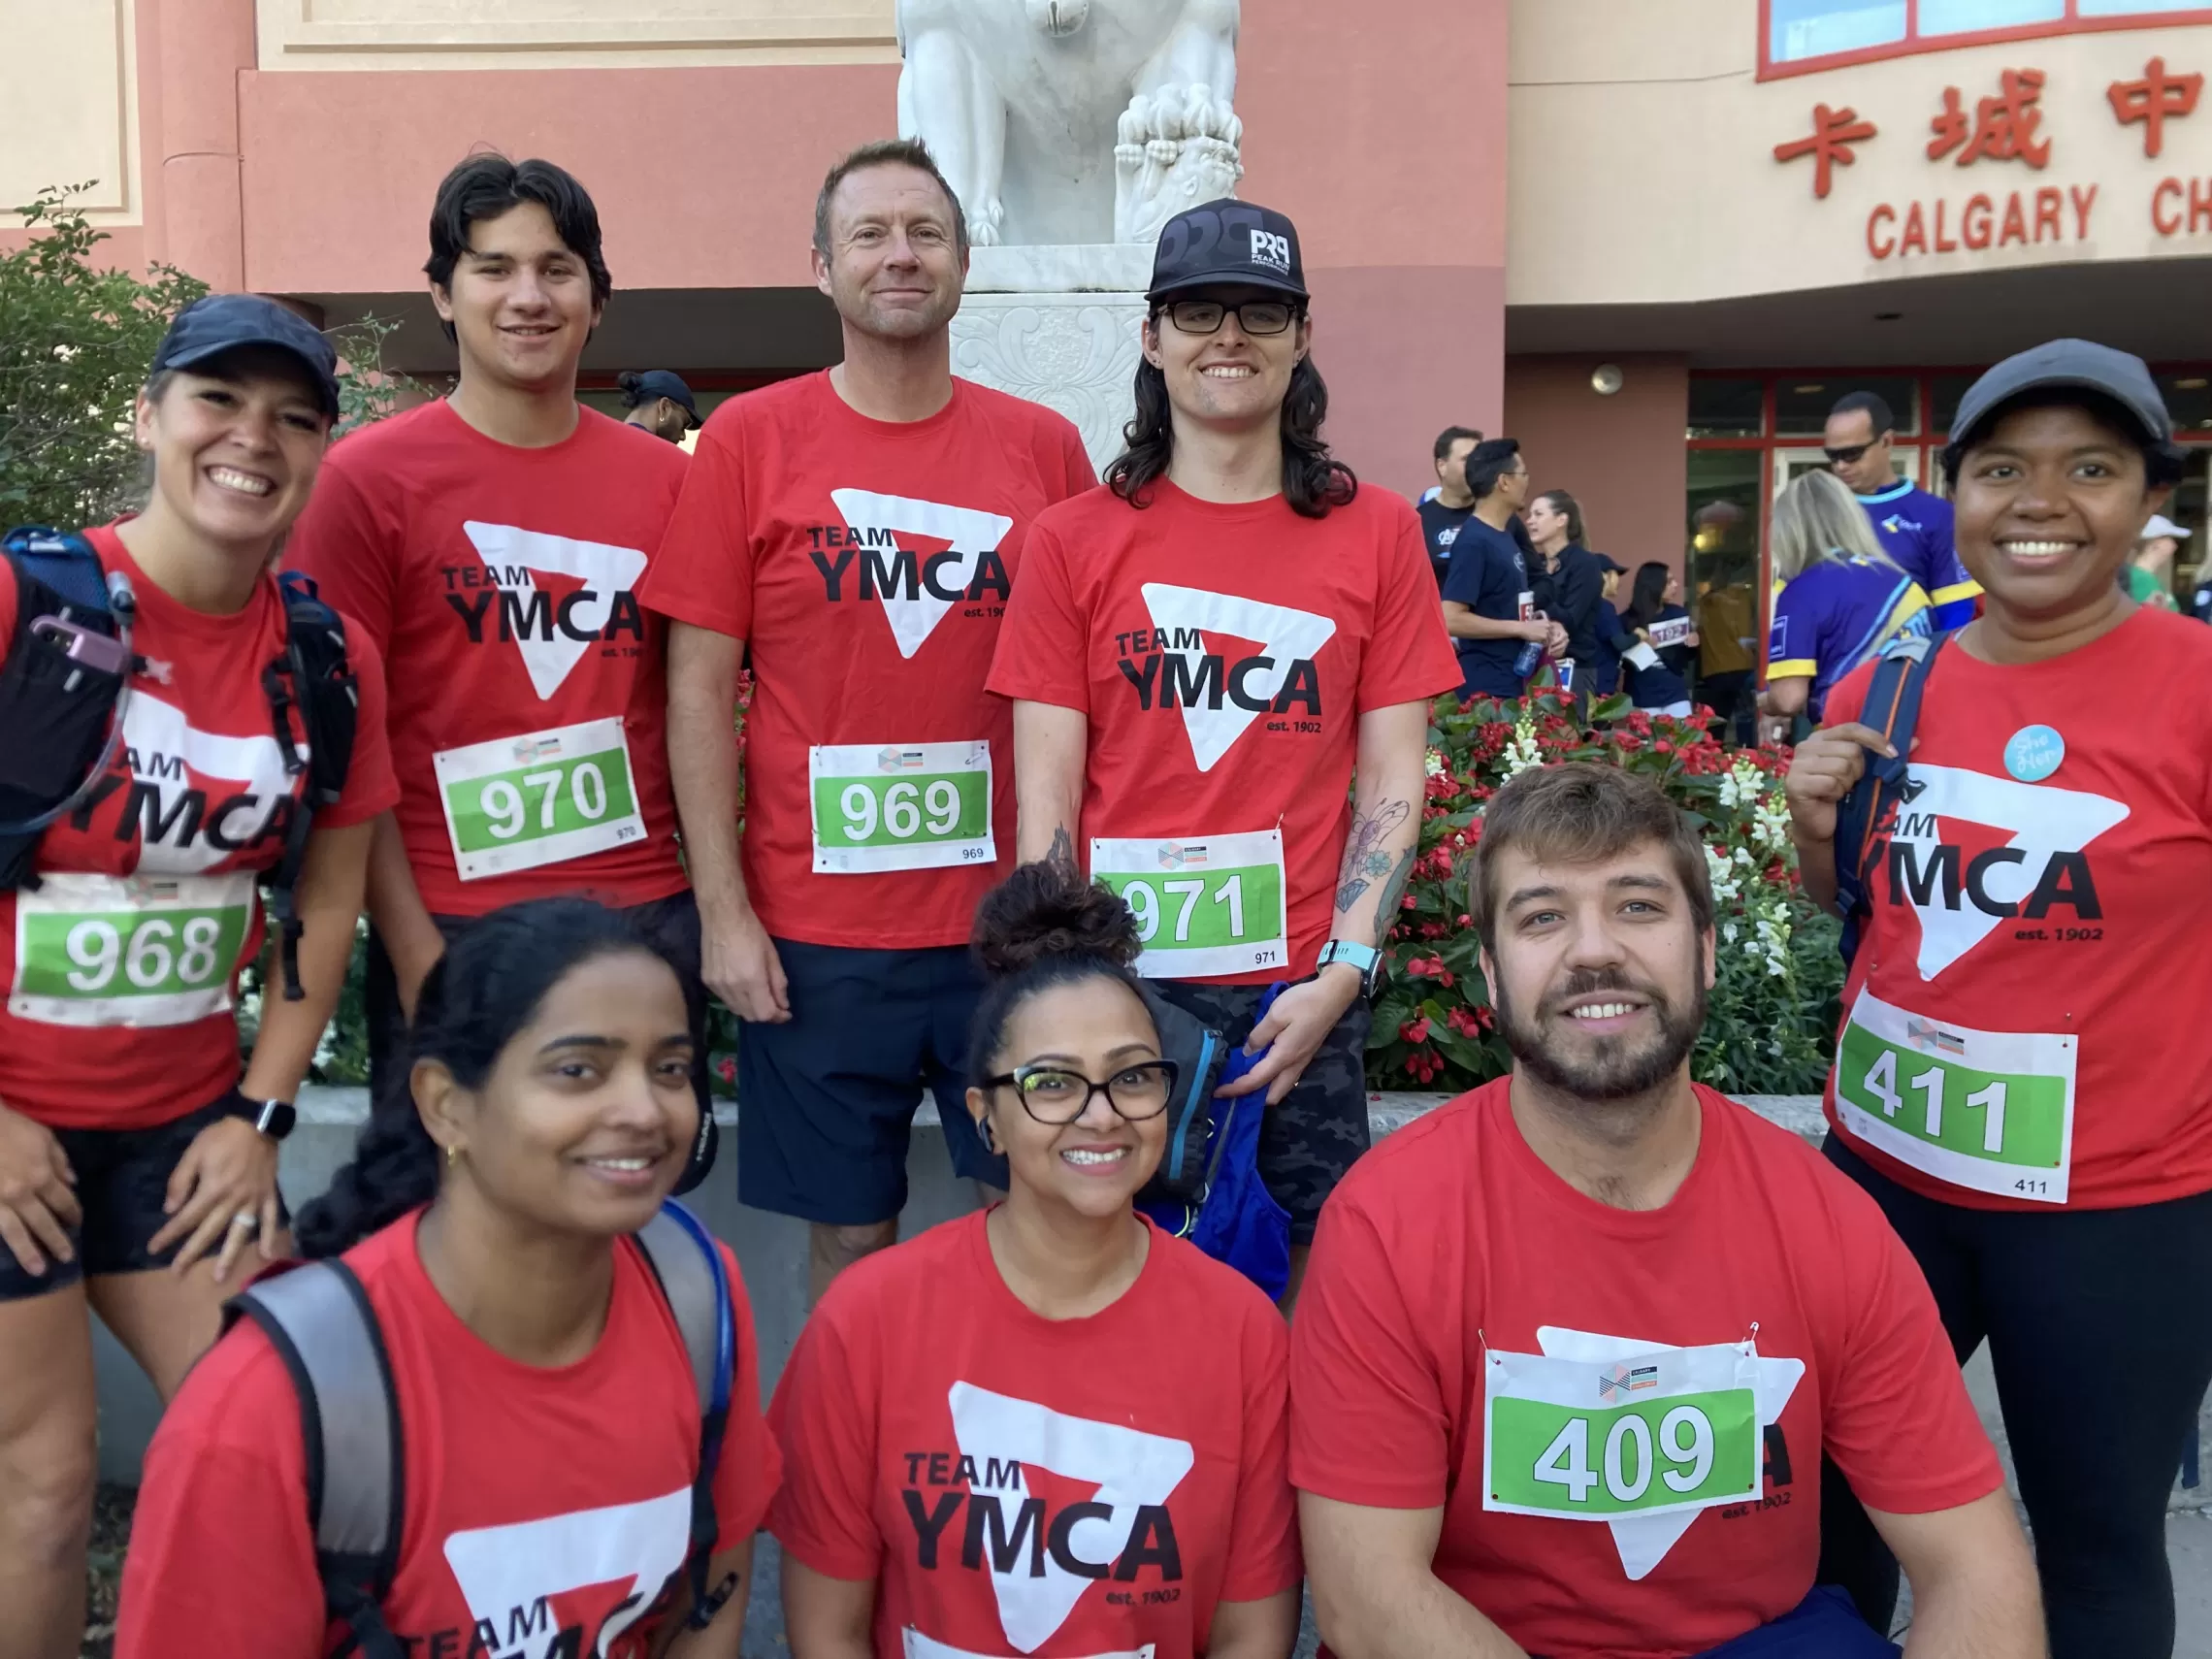 Team YMCA is ready to hit the 5K run, wearing their red YMCA shirts and runner numbers.